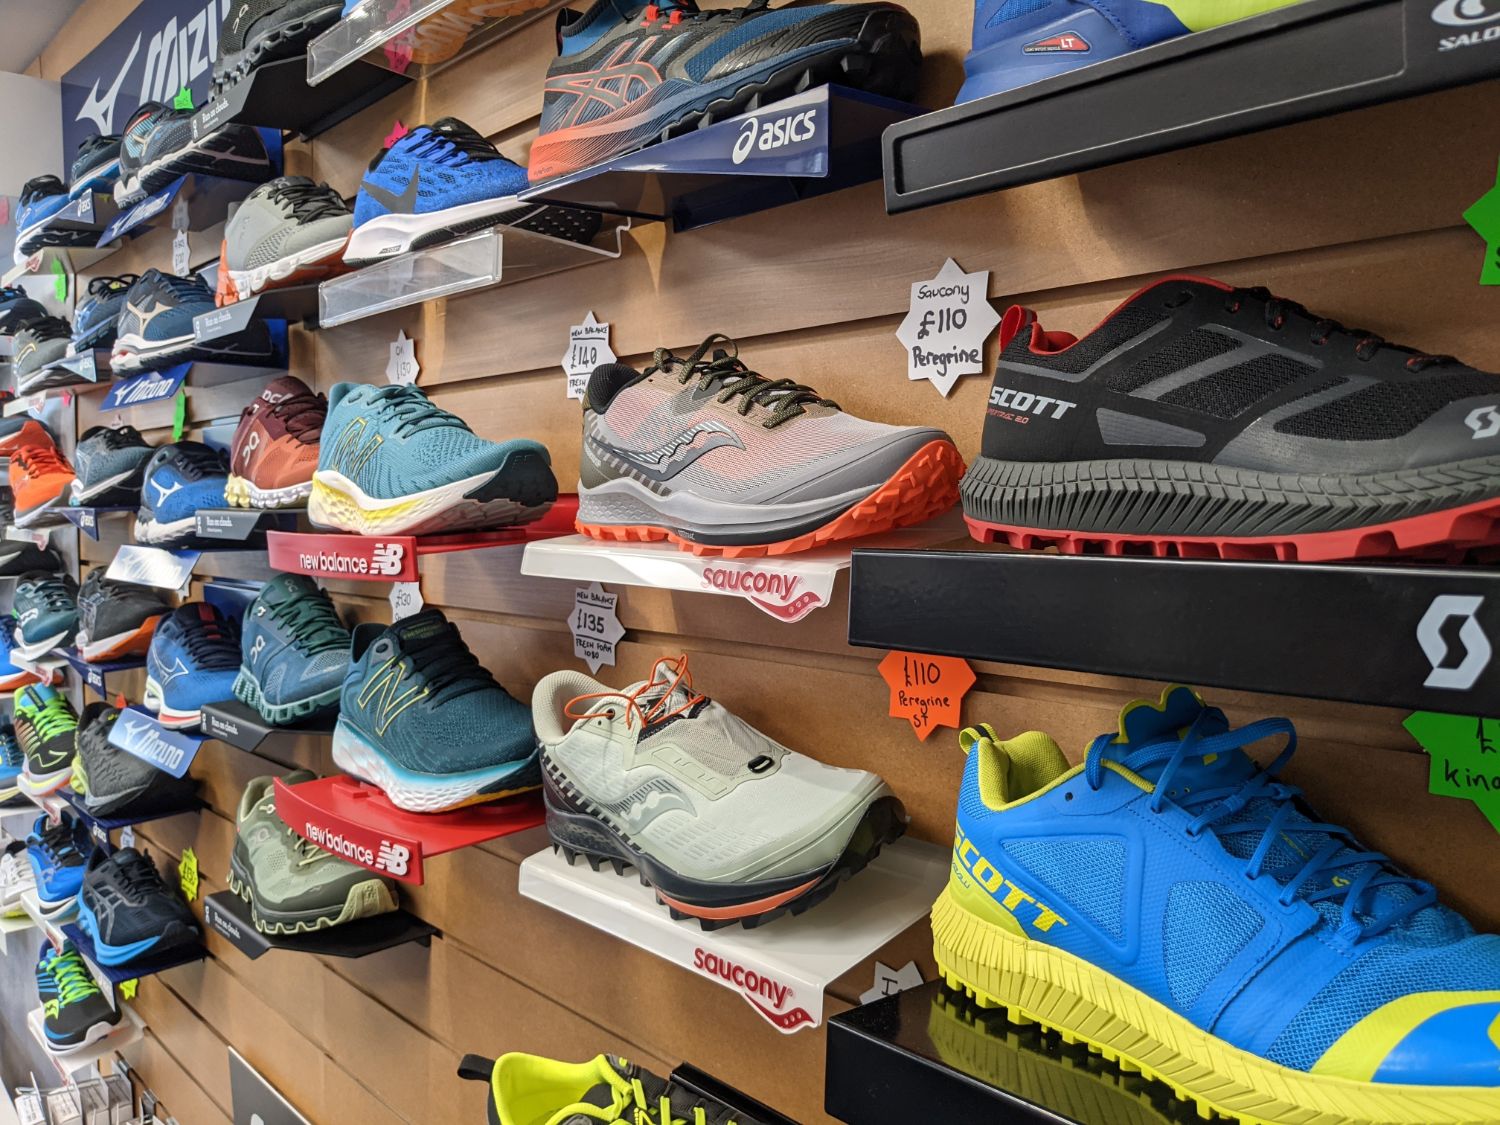 A great selection of running shoes at Leicester Running Shop